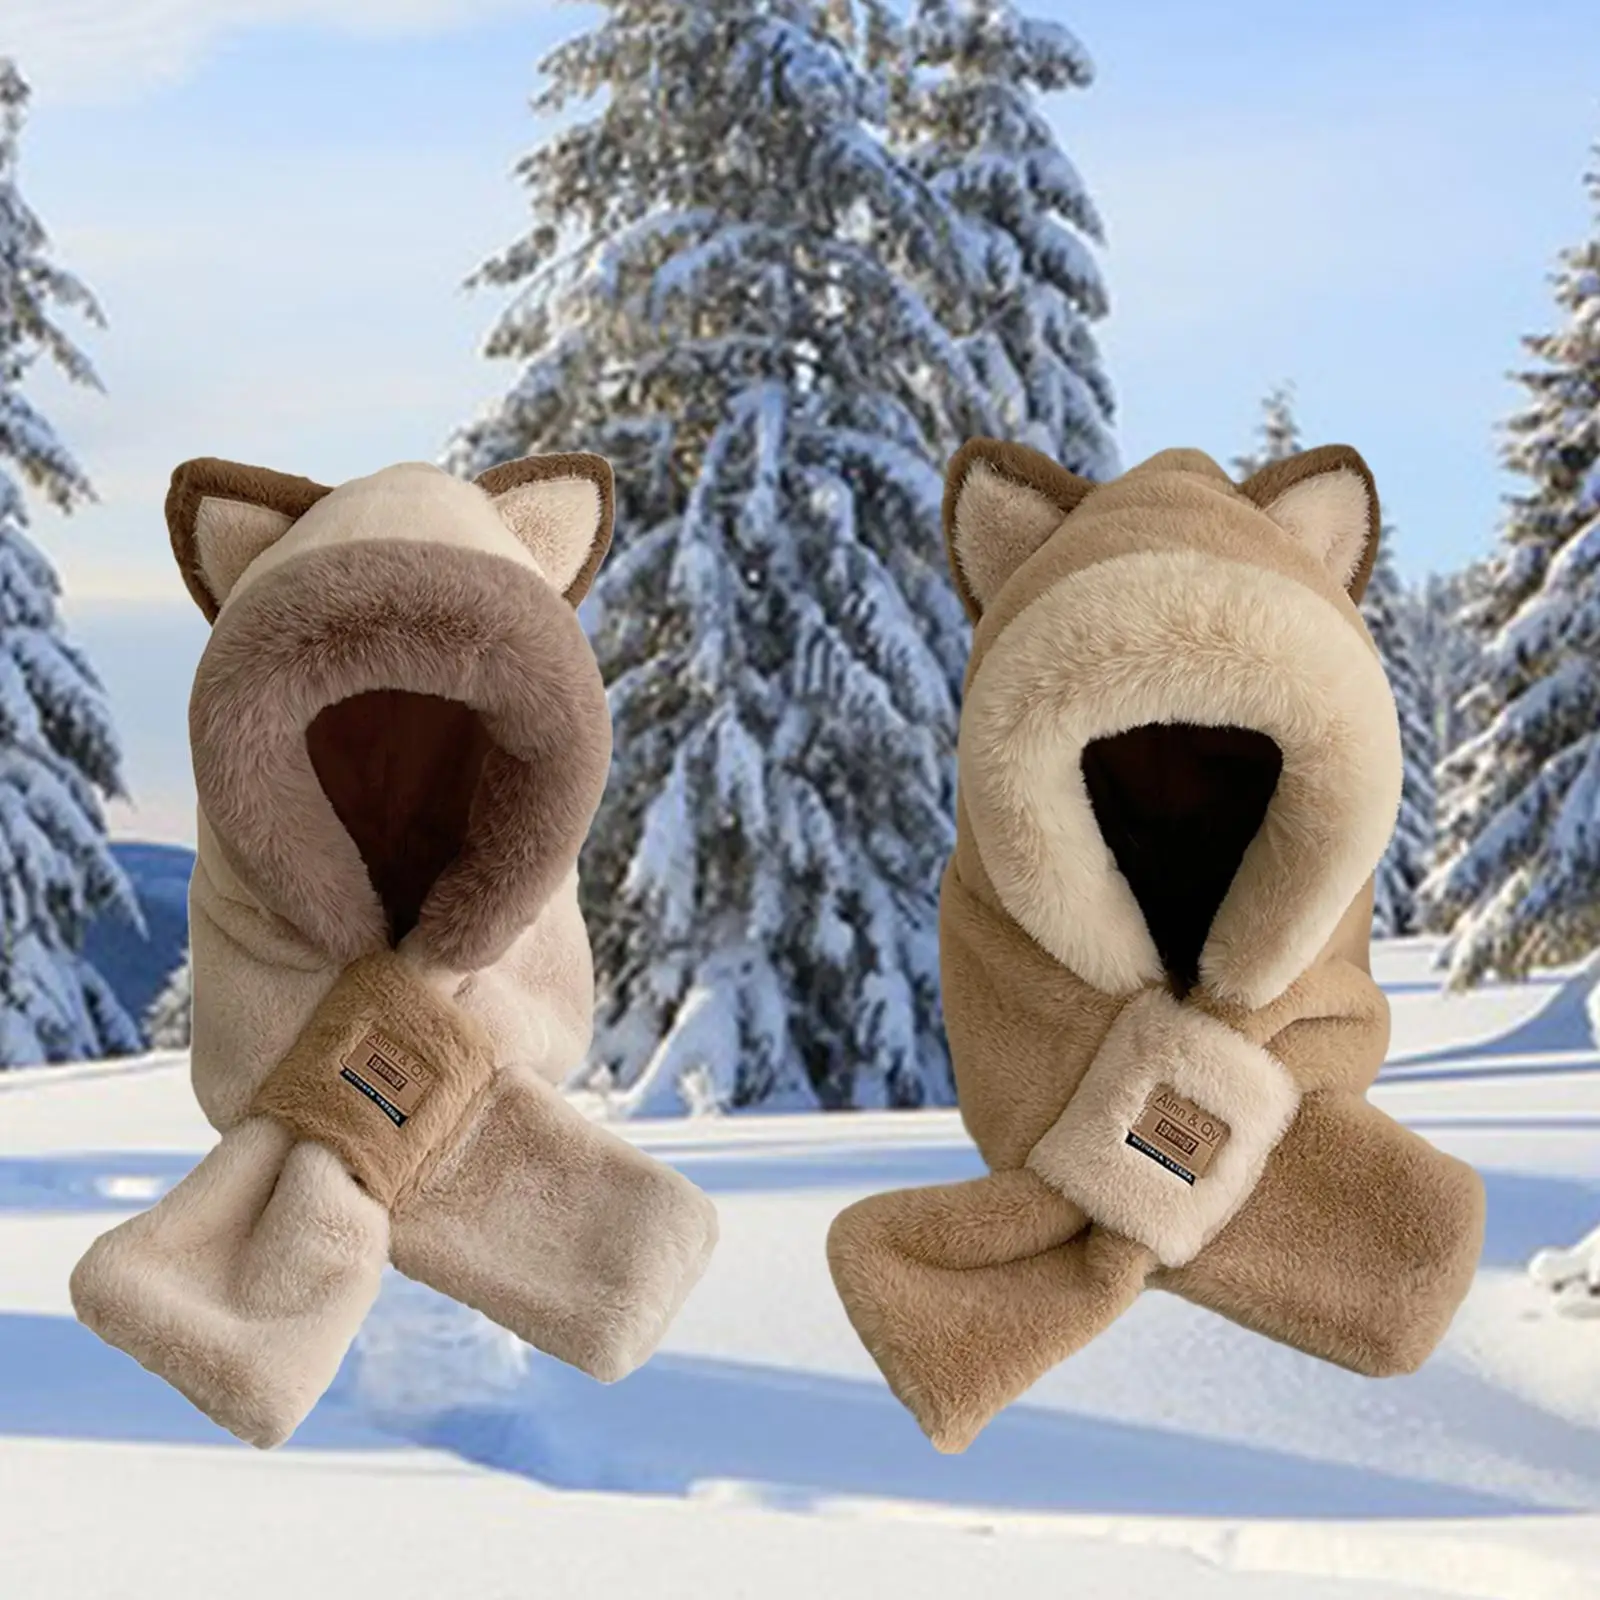 Plush Hooded Scarf Warm Cute Headwear for Women Hoodie Winter Hat Scarf Set for Outdoor Themed Party Riding Travel New Year Gift